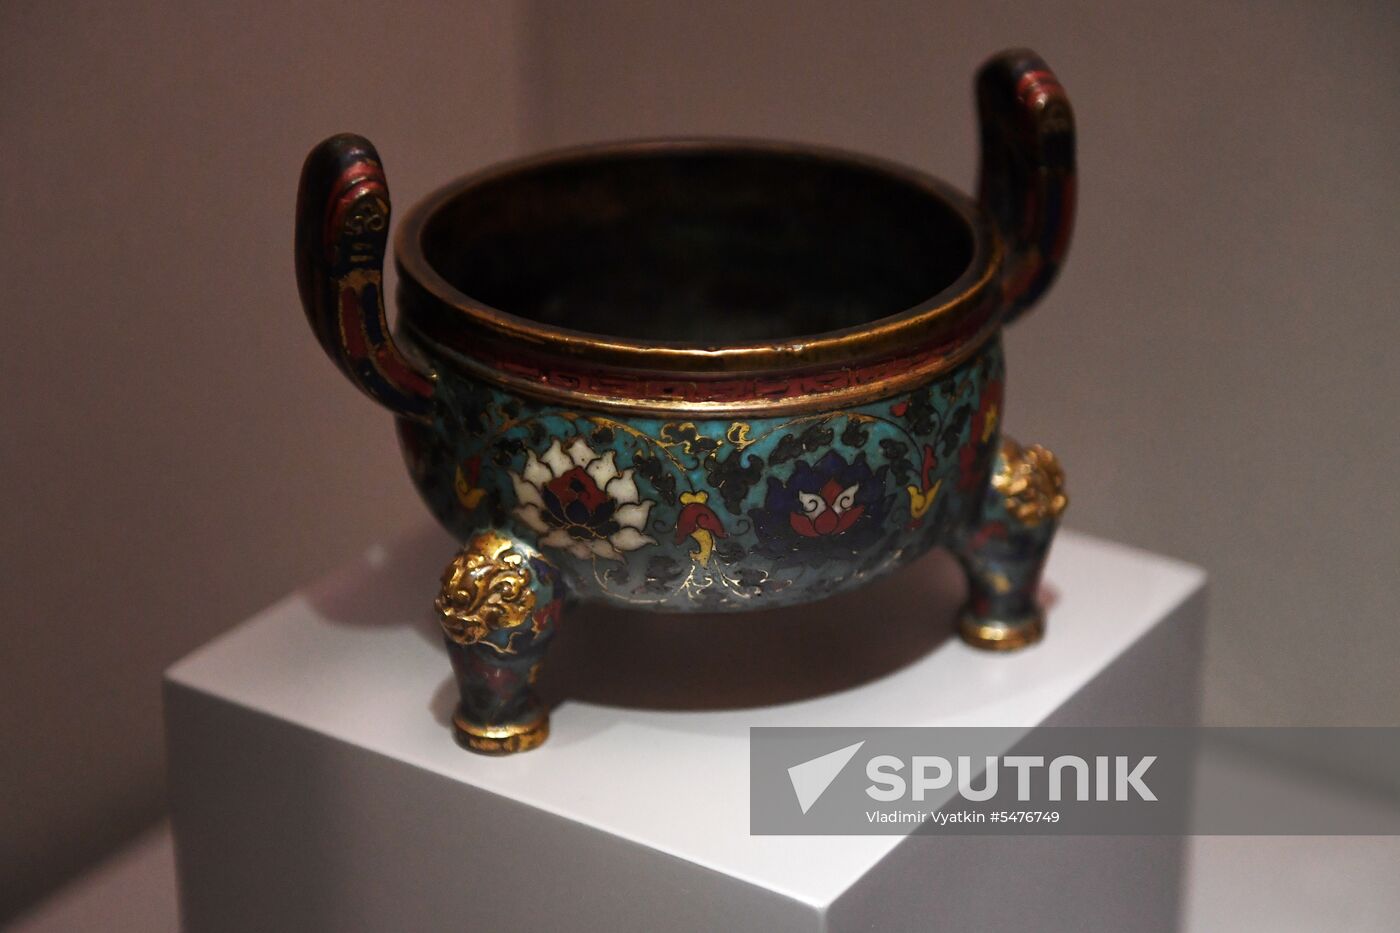 Exhibition 'Ming dynasty: The radiance of knowledge'